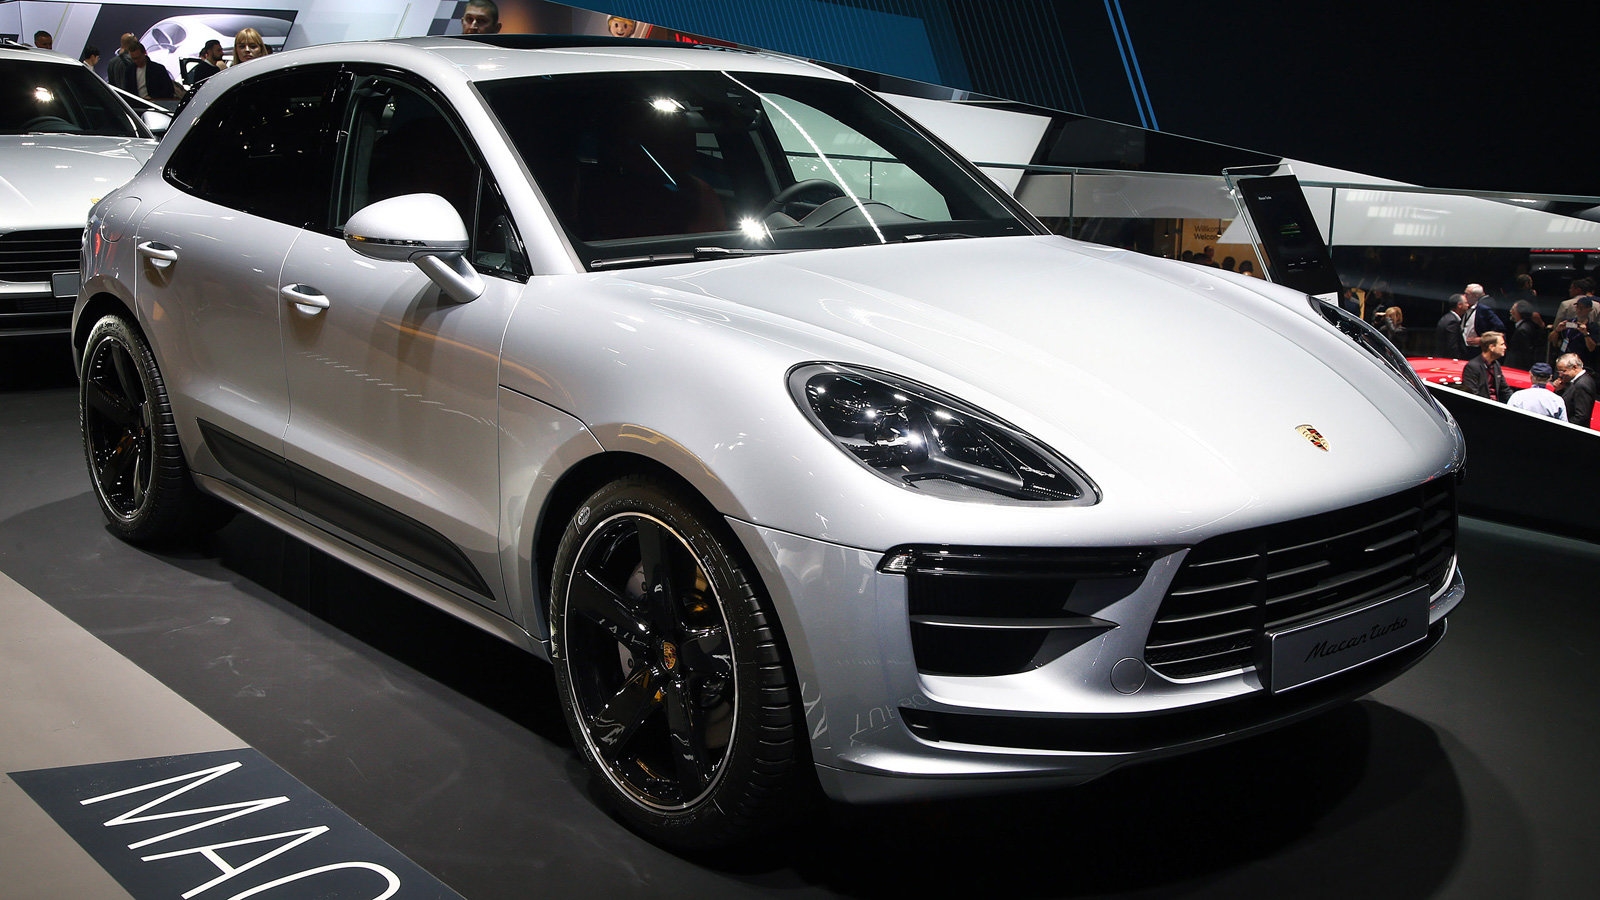 Porsche's Macan EV will fully replace its gas counterpart in a few years | DeviceDaily.com